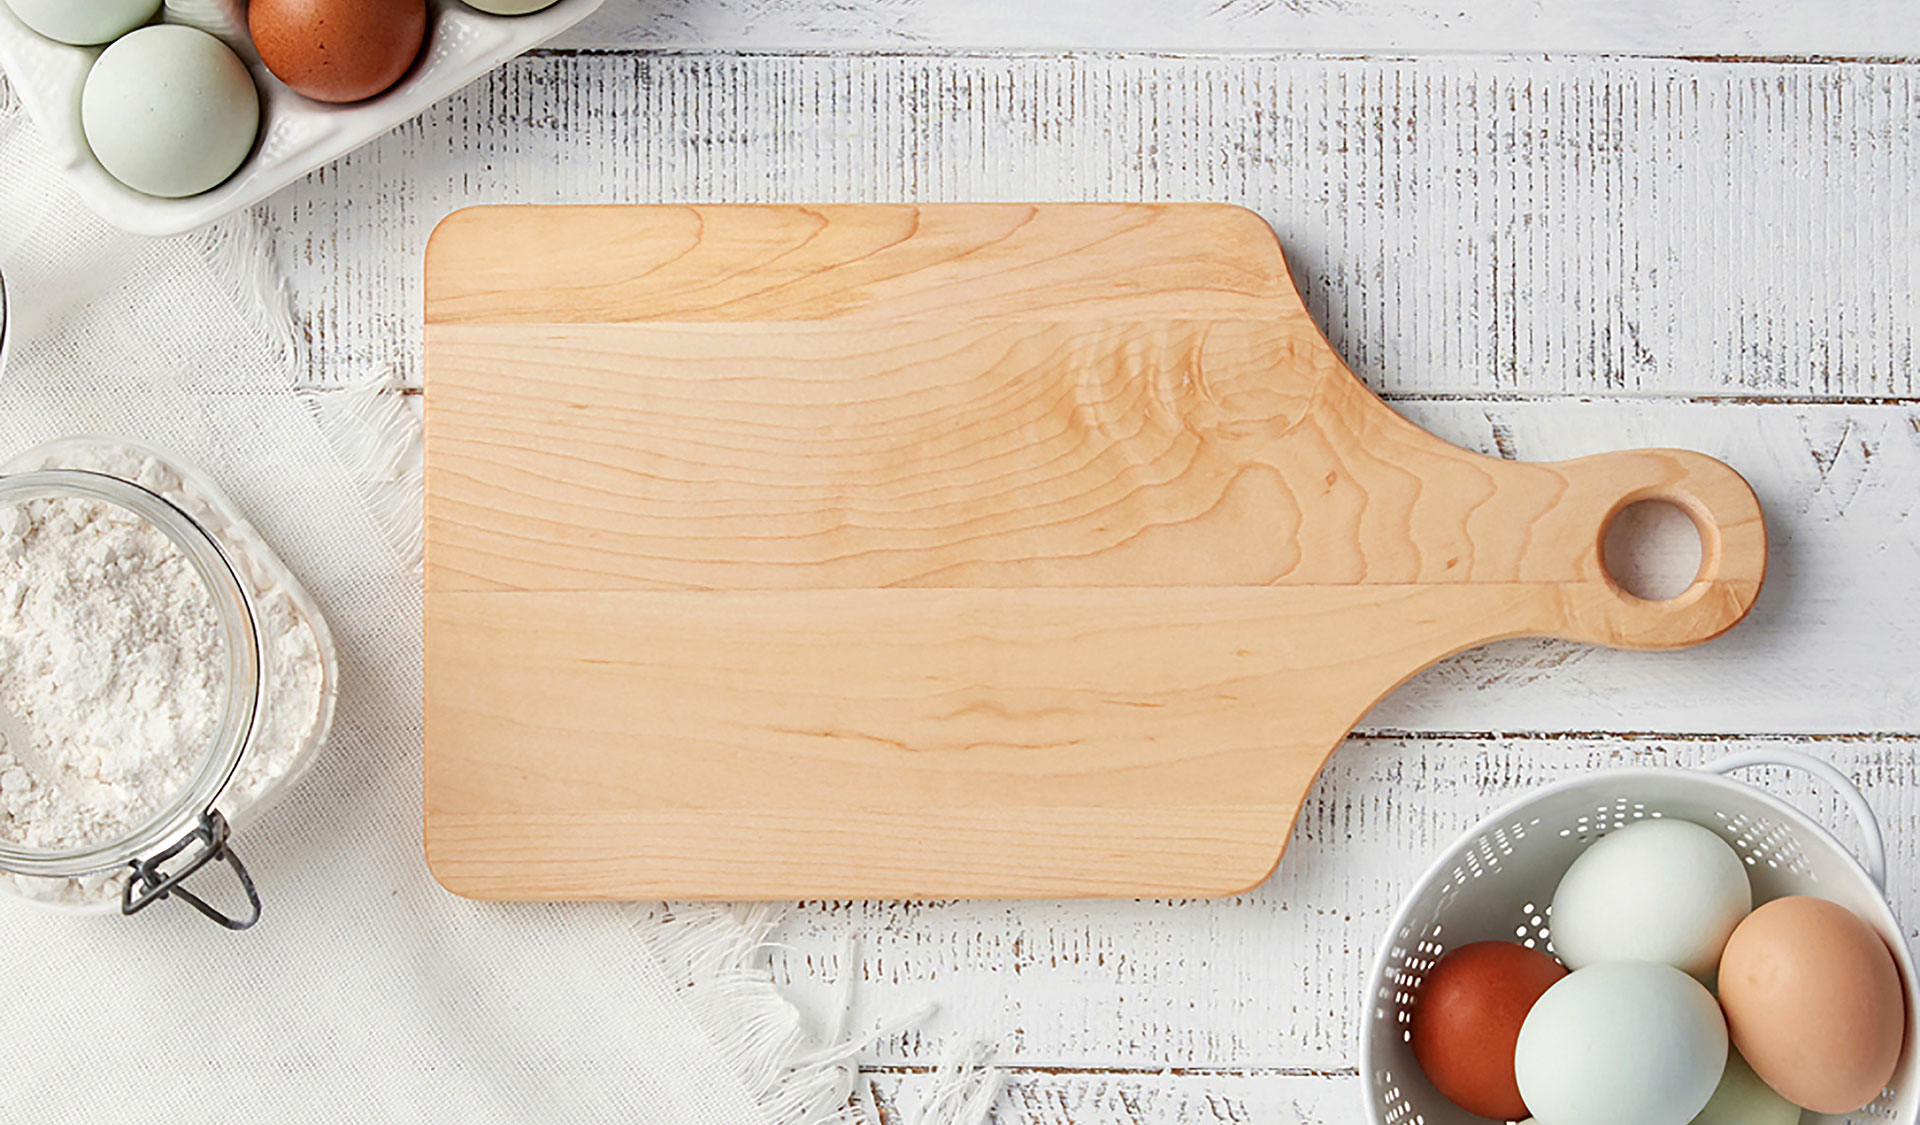 Cutting board with eggs and flour against shiplap photographed by food and beverage photographer Kate Benson.